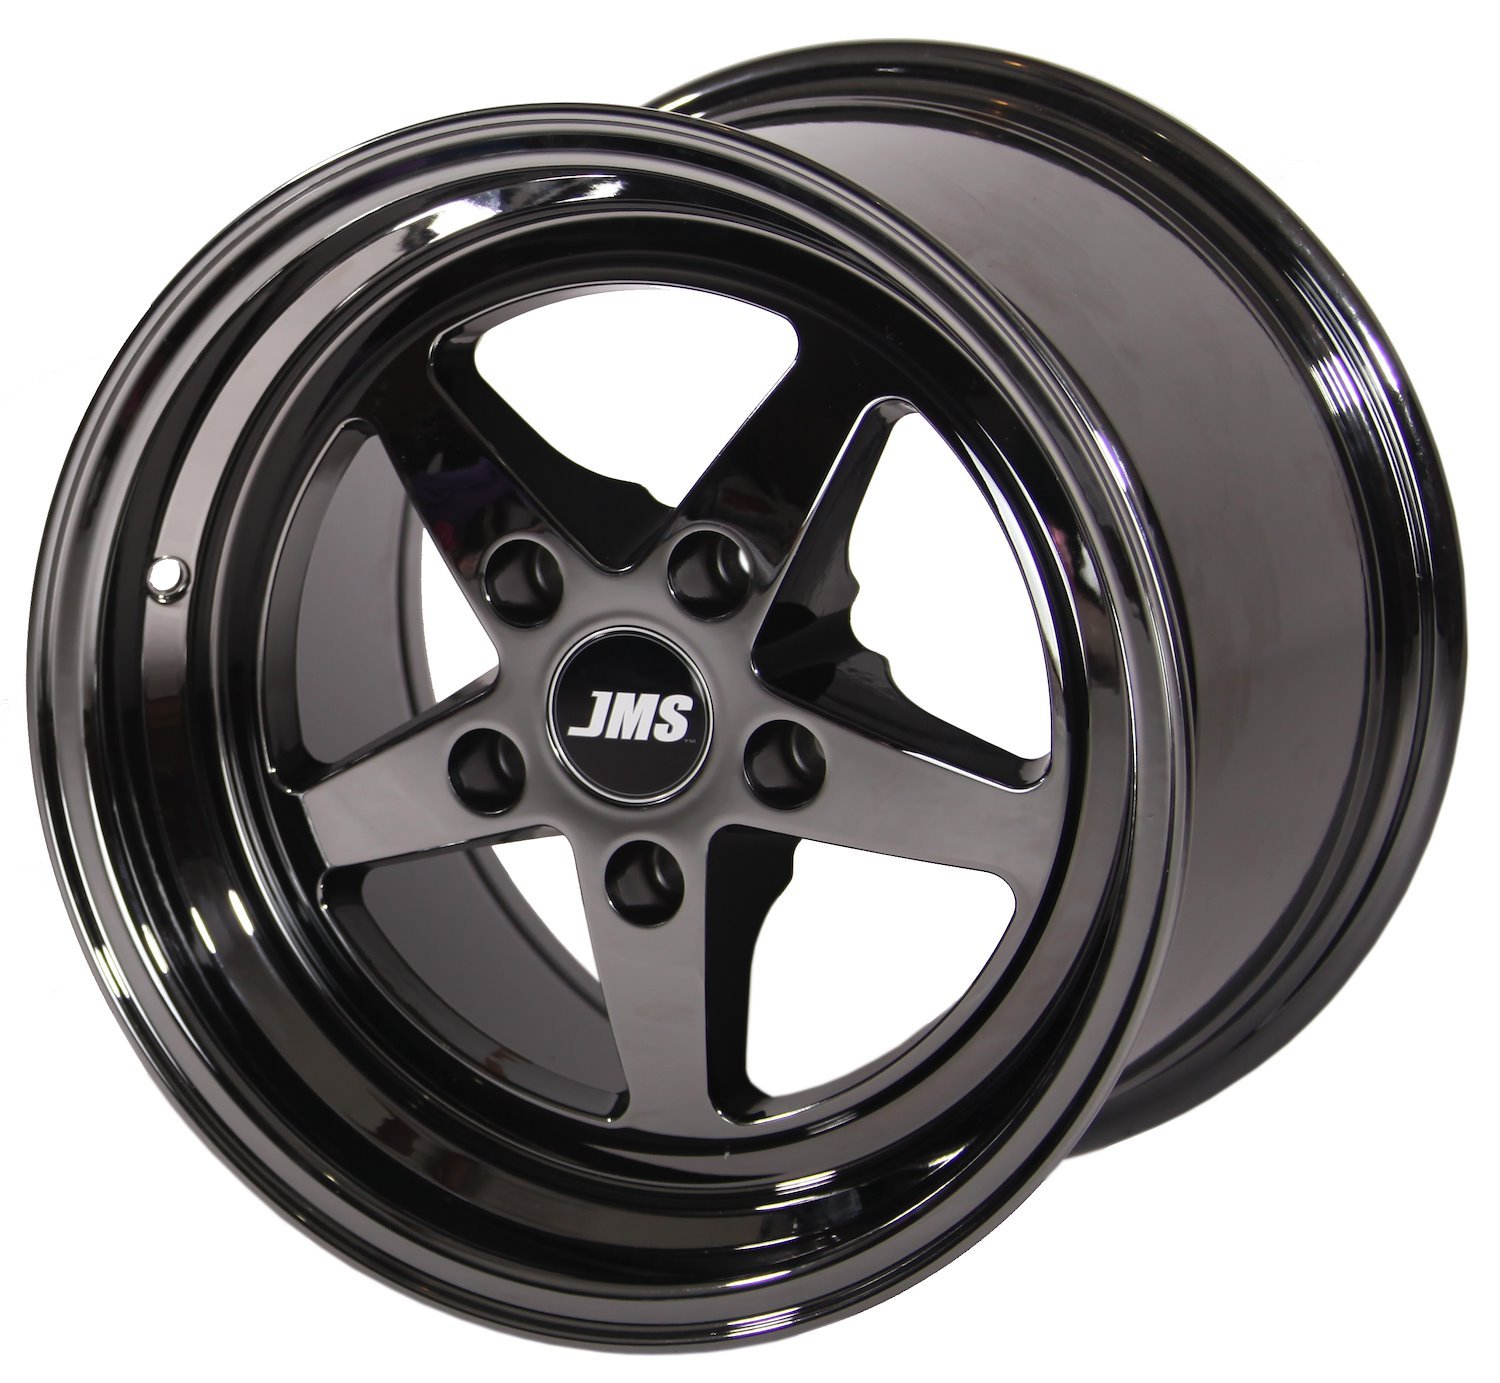 Avenger Racing Wheel 1994-2019 Ford Mustang and 2007-2012